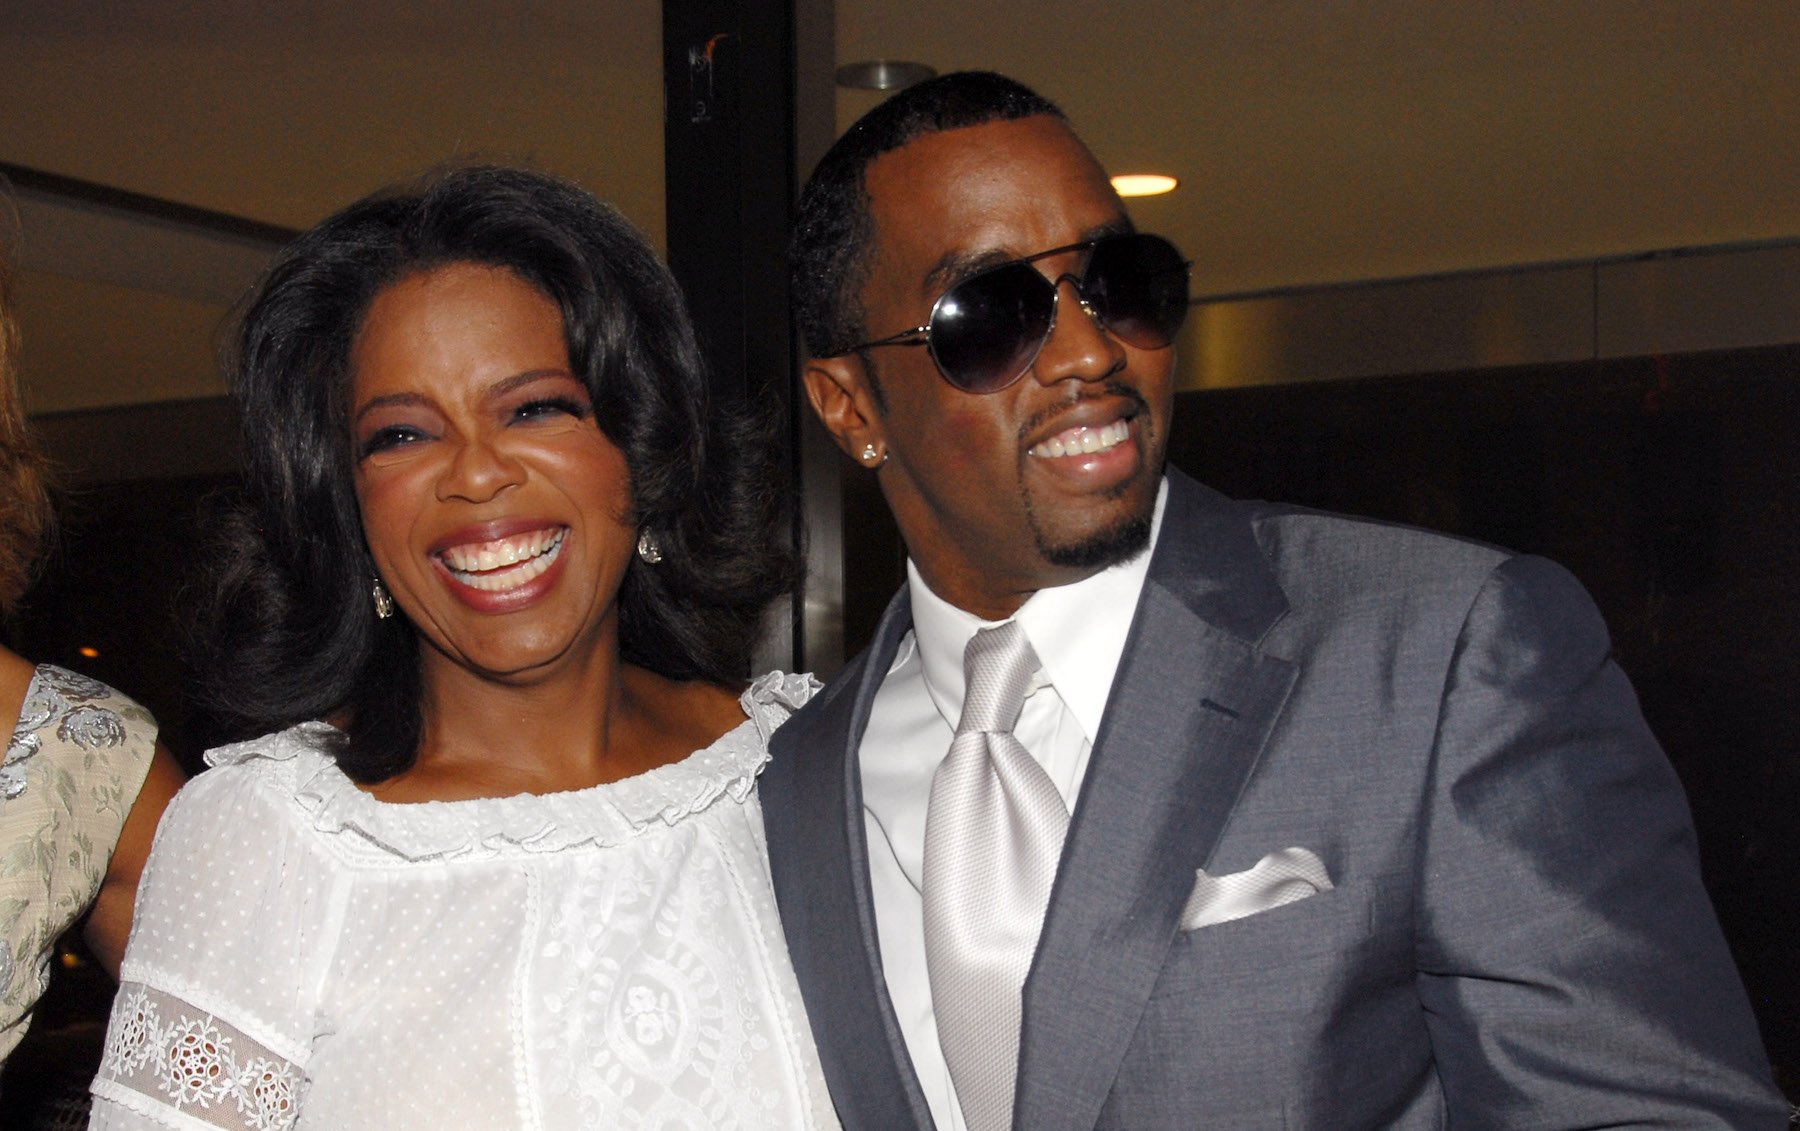 Oprah Winfrey and Sean "Diddy" Combs pictured together